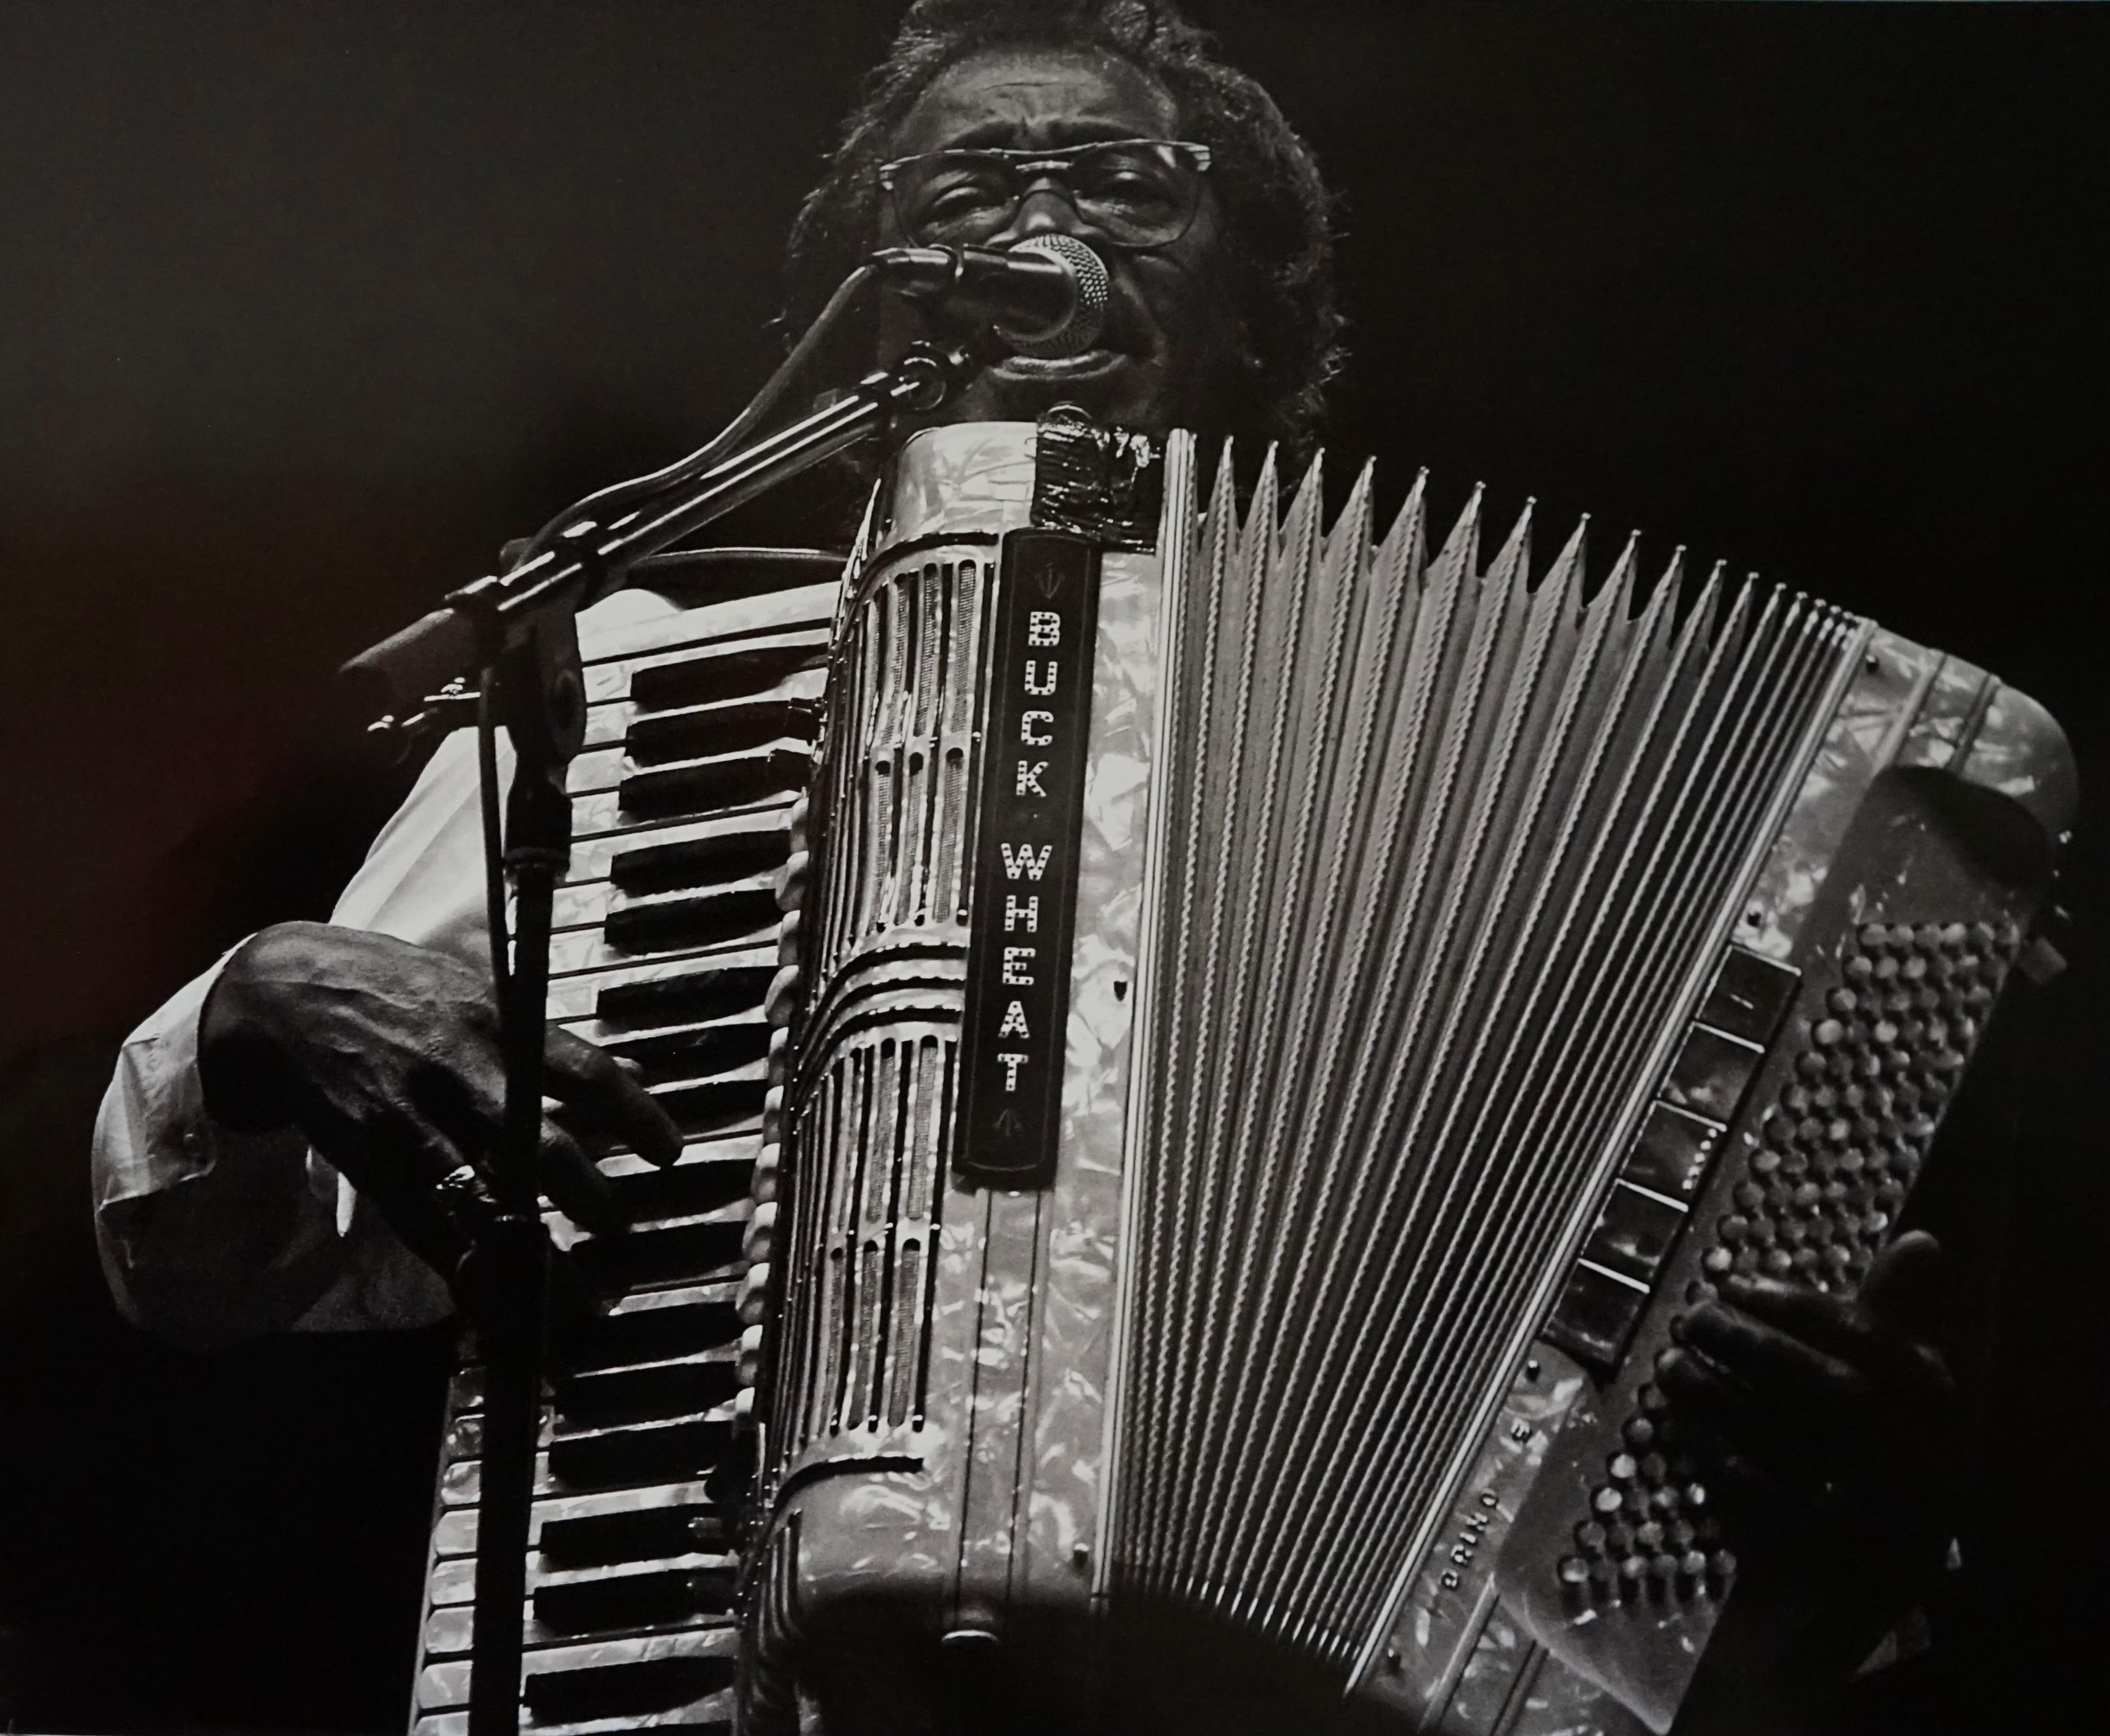 Buckwheat Zydeco at COS FAC at Colorado College, 2011